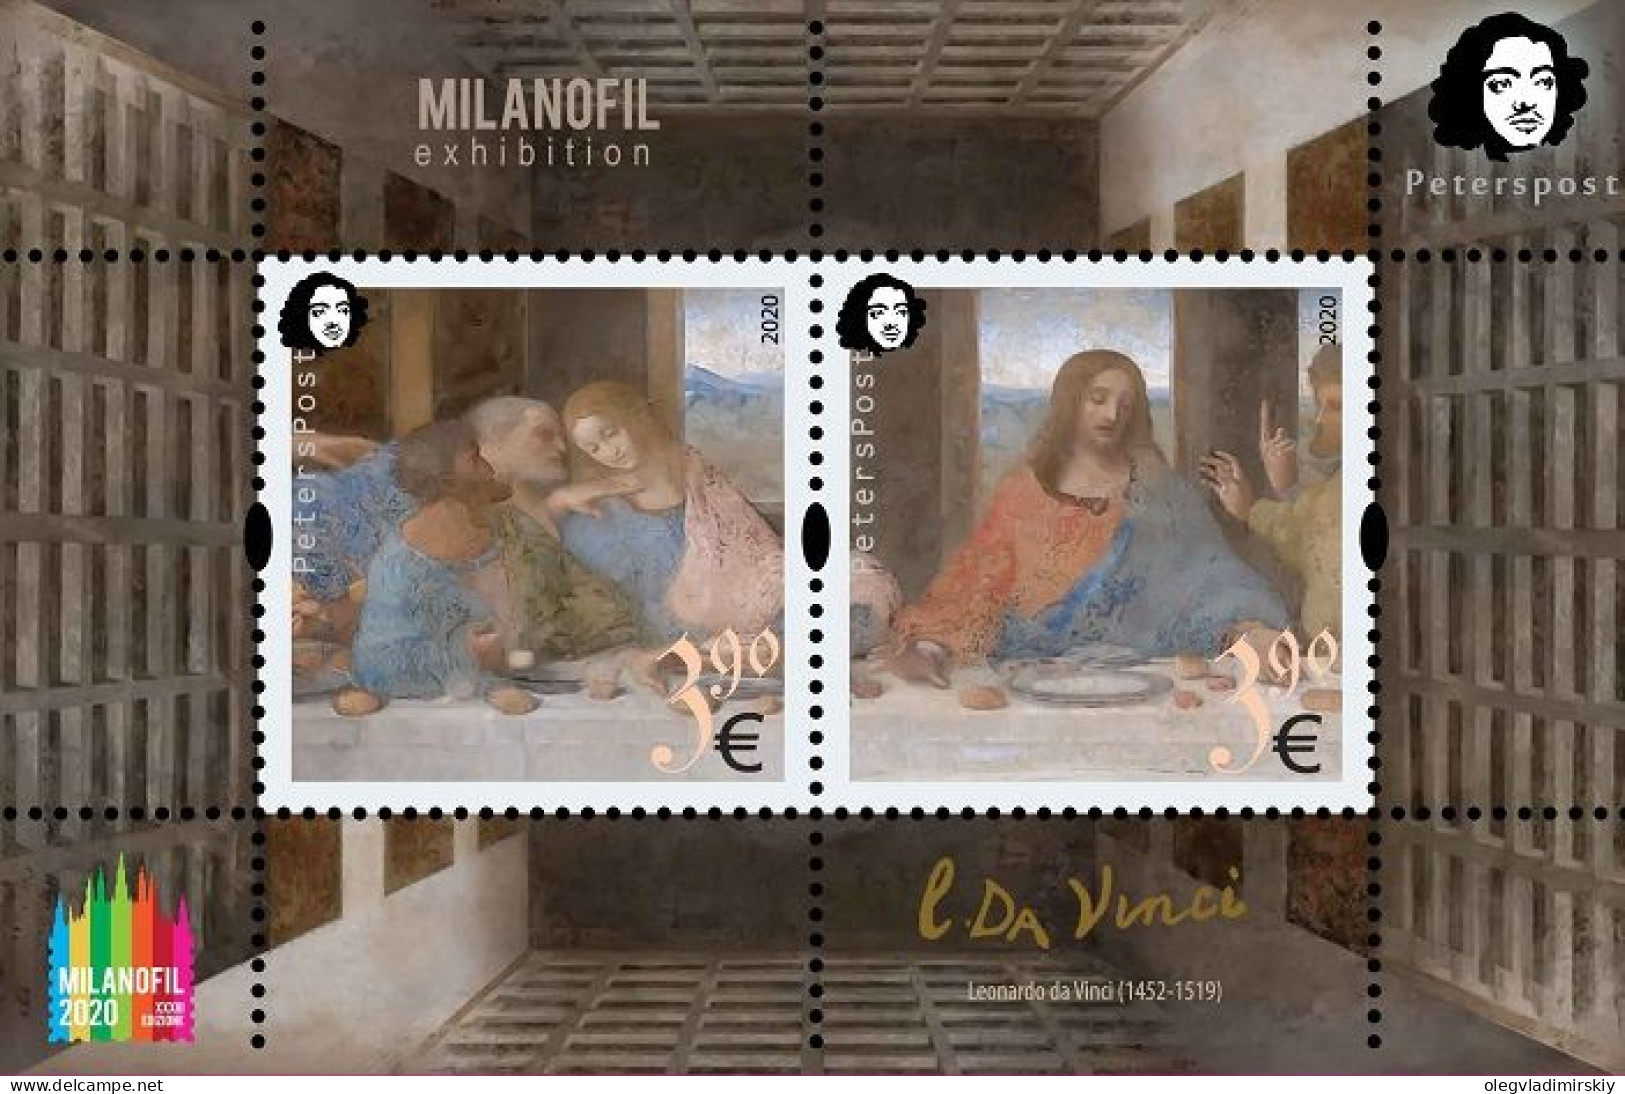 Finland 2020 Leonardo Da Vinci 500 Years From The Date Of Death "The Lord's Supper" MILANOFIL-2020 Peterspost Block MNH - Blocs-feuillets